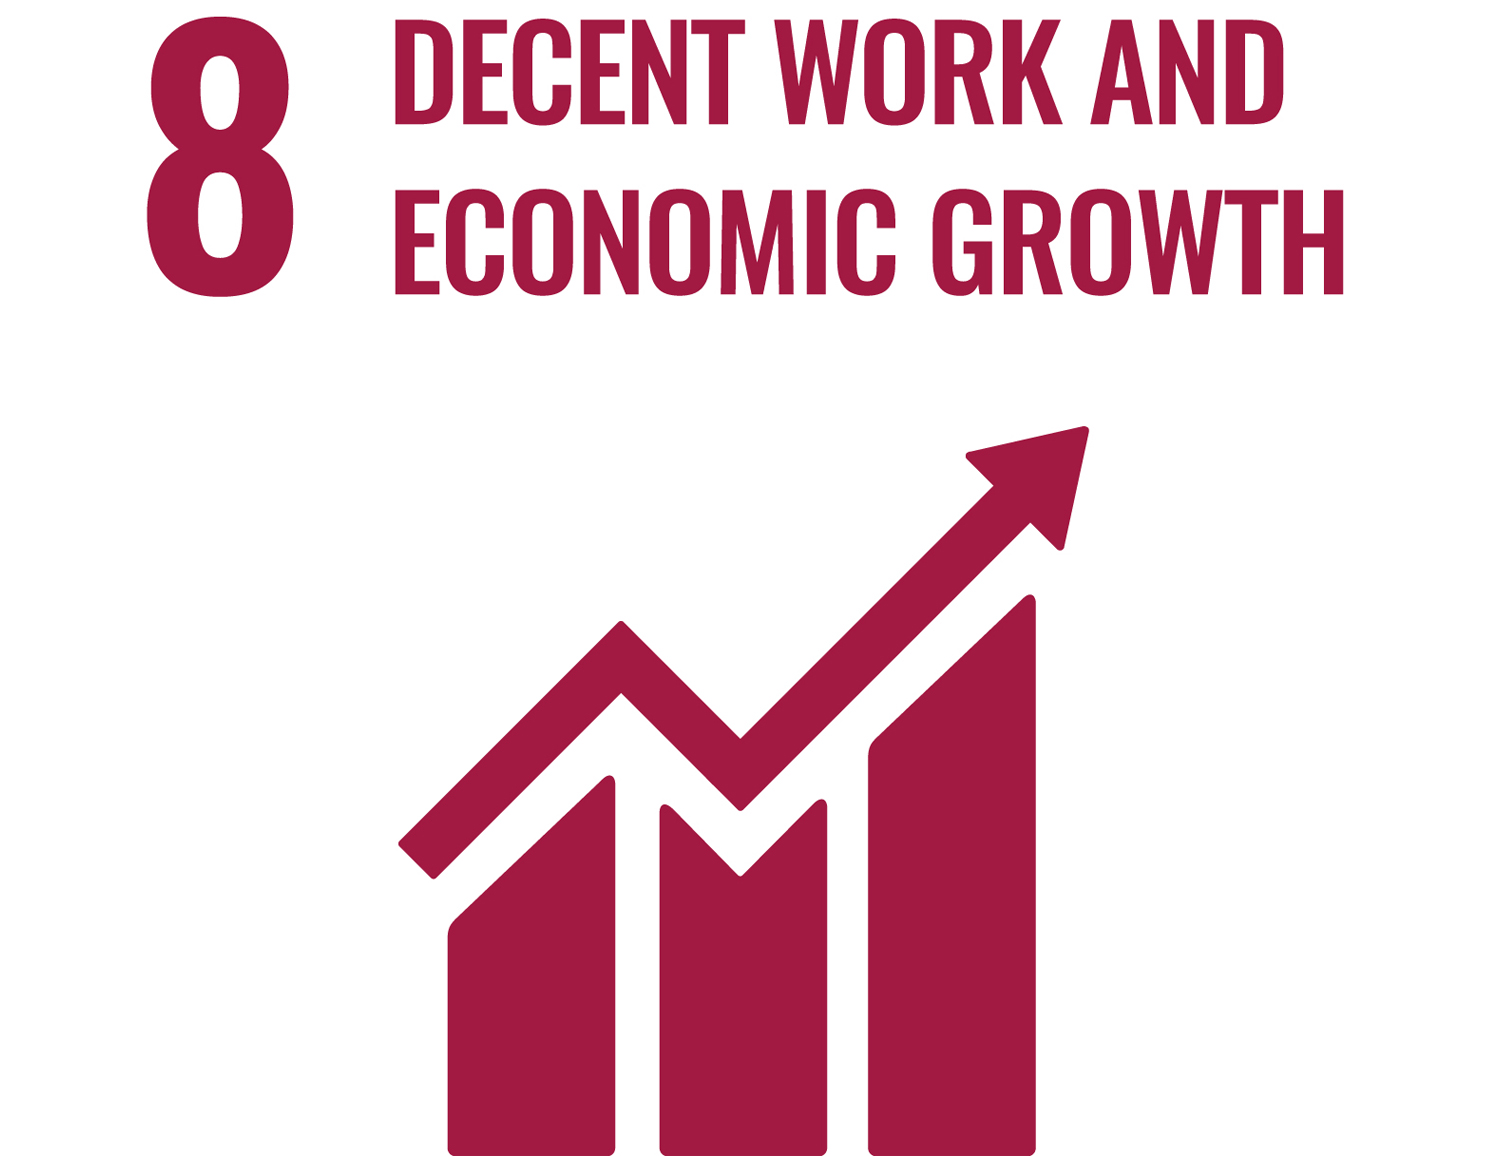 Goal 8: Decent Work and Economic Growth